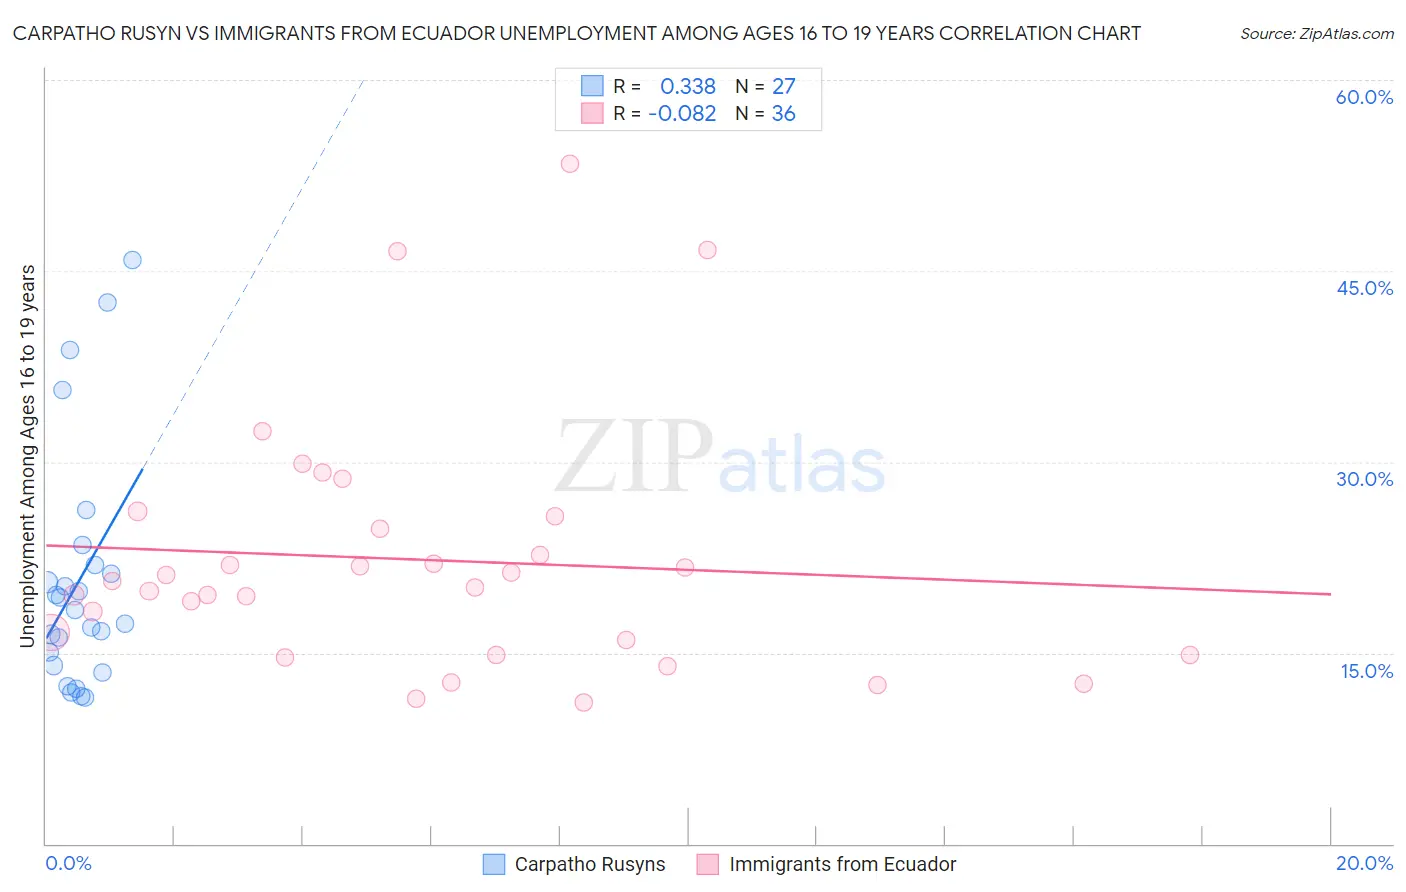 Carpatho Rusyn vs Immigrants from Ecuador Unemployment Among Ages 16 to 19 years